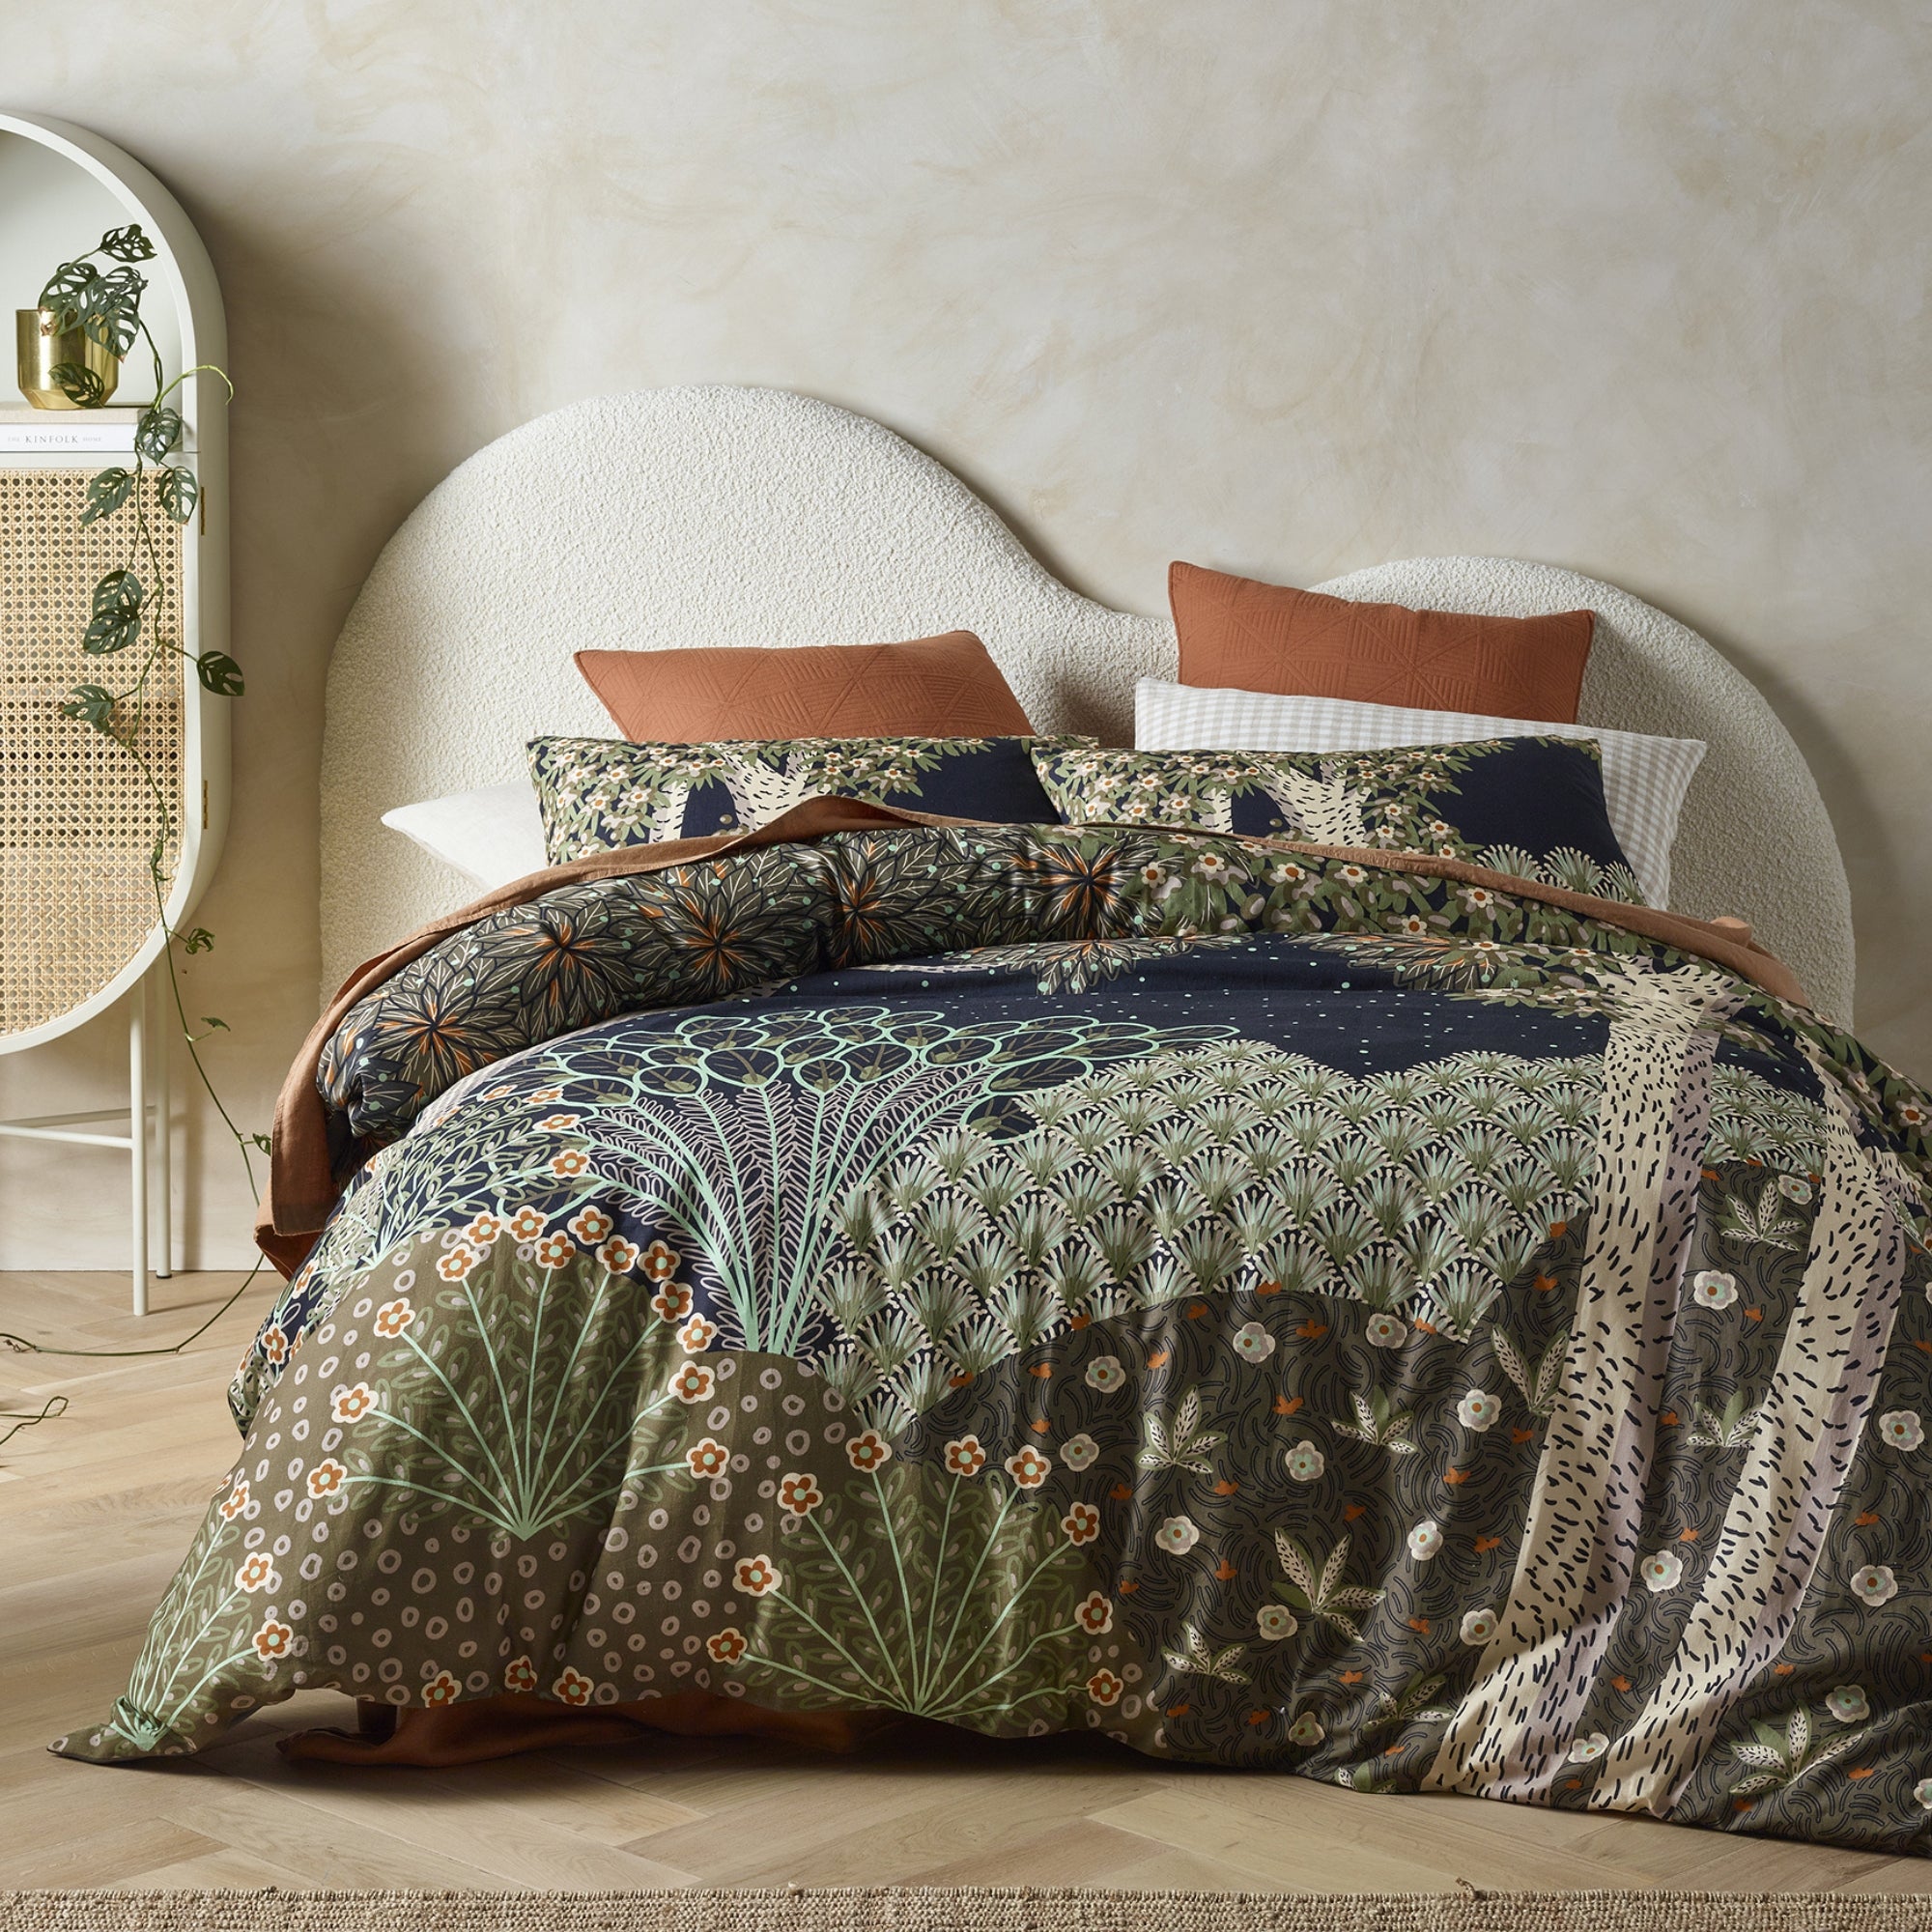 Twilight Forest Bloom Queen Quilt Cover Set in a well-appointed bedroom, highlighting the tranquil color palette and design